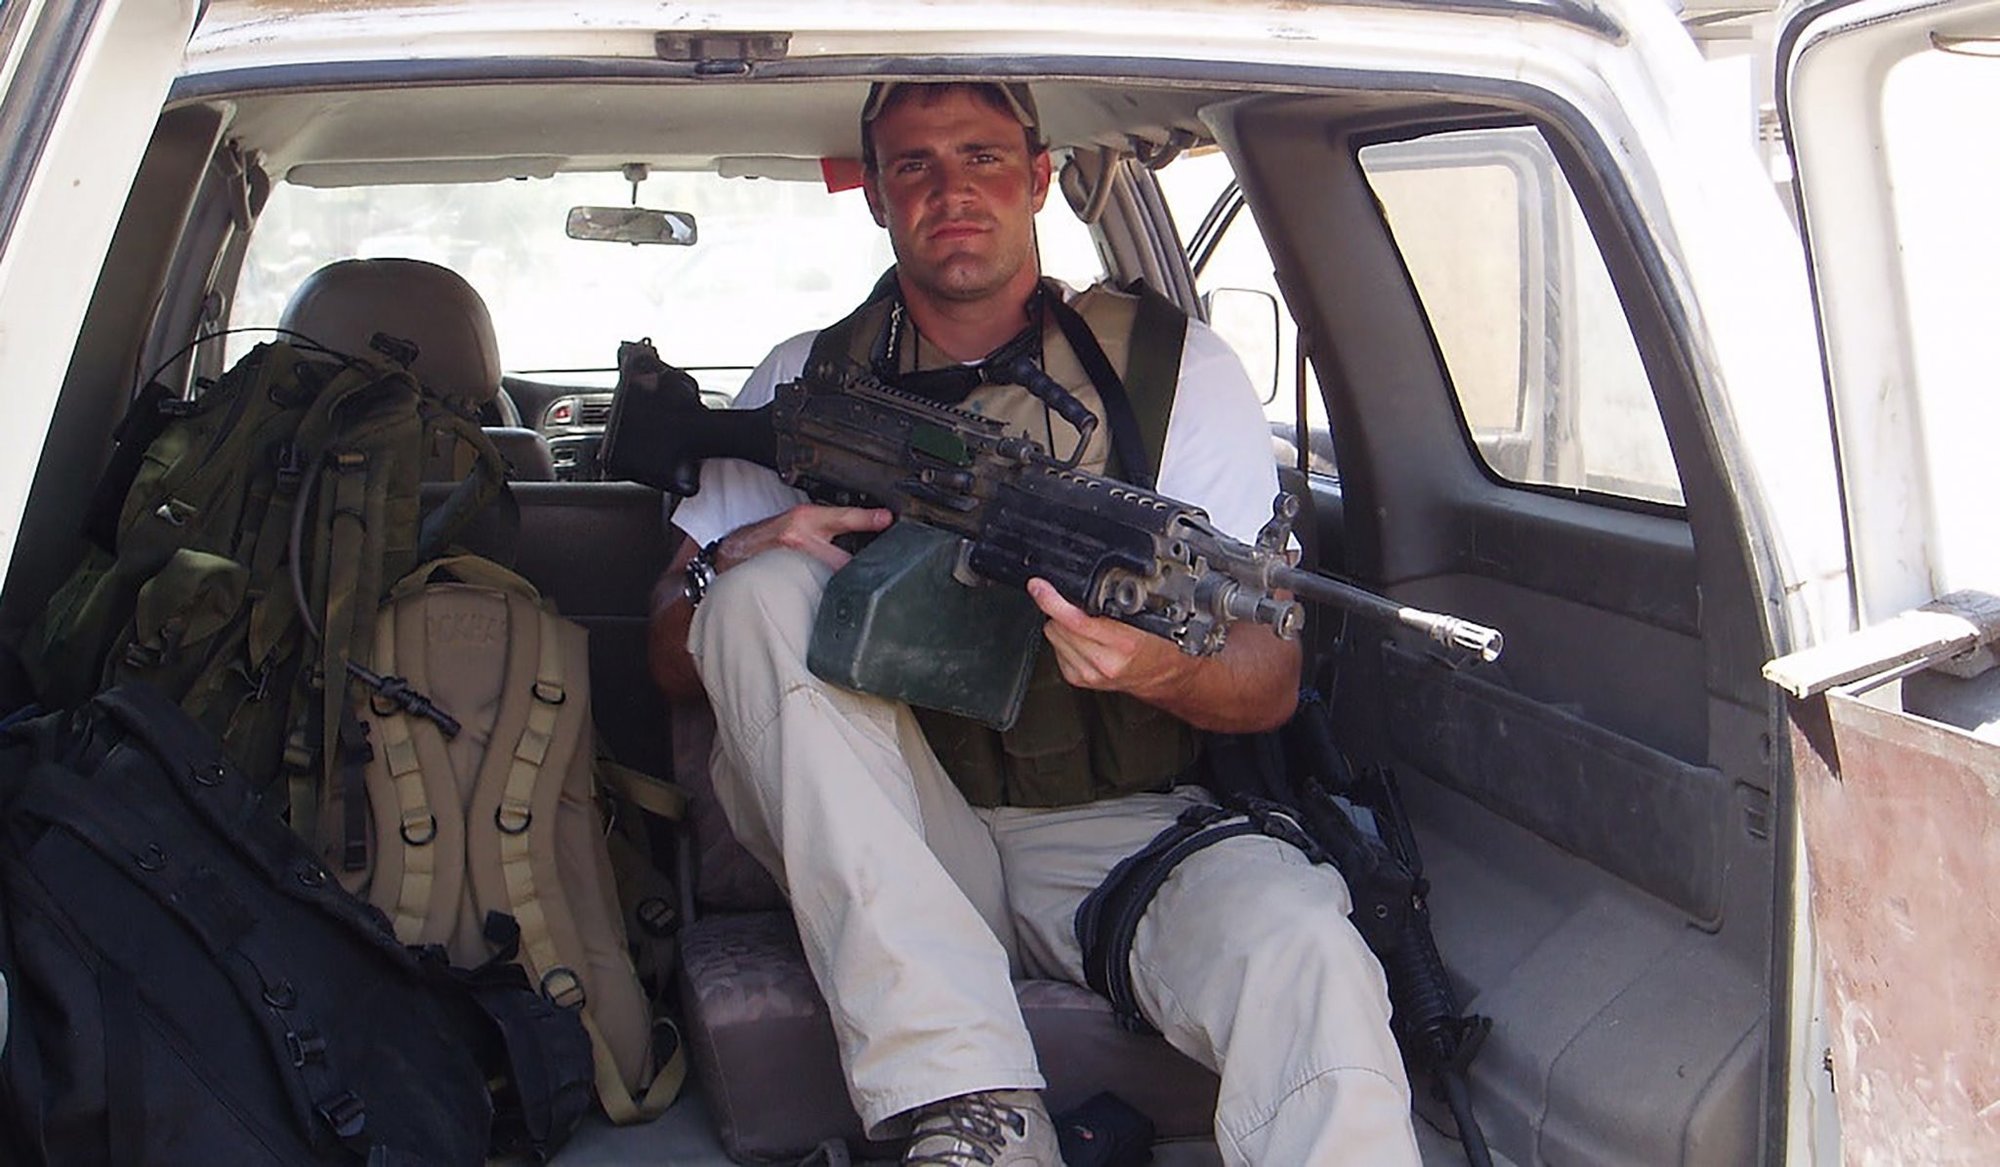 Morgan Lerette, a former Army intelligence officer who spent 18 months in Iraq, writes about his experience as a Blackwater operative with countless missions in his new book, ‘Welcome to Blackwater: Mercenaries, Money and Mayhem in Iraq.’ Photo courtesy of Morgan Lerette.